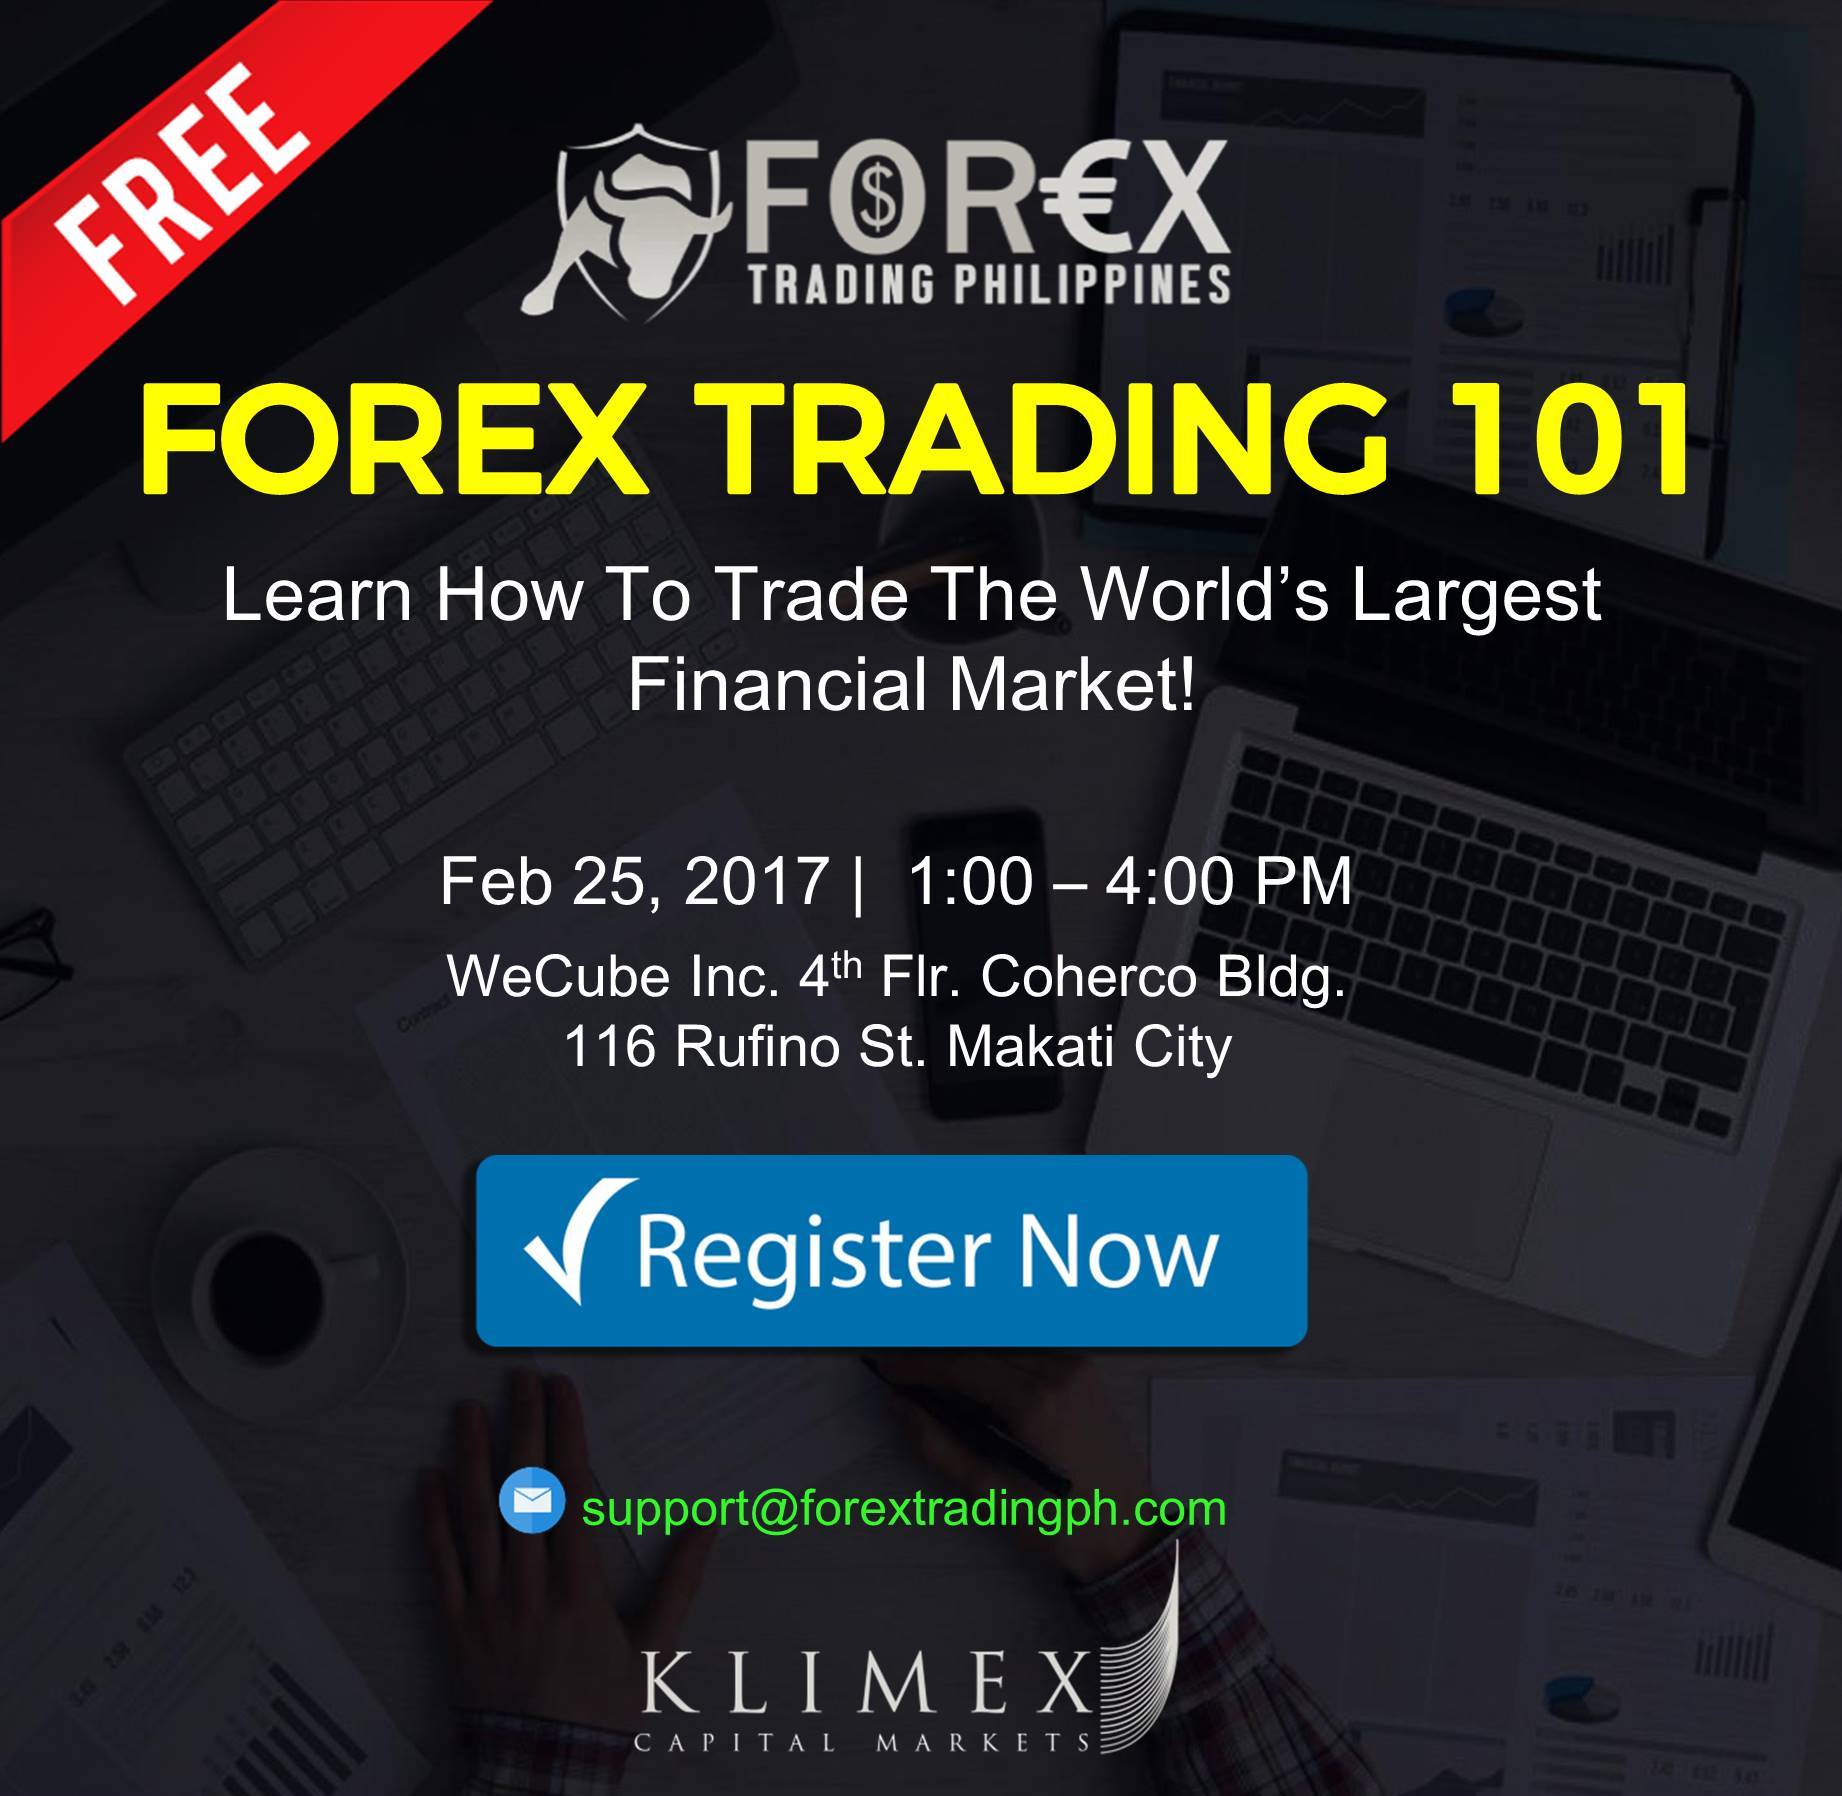 Best forex trading philippines